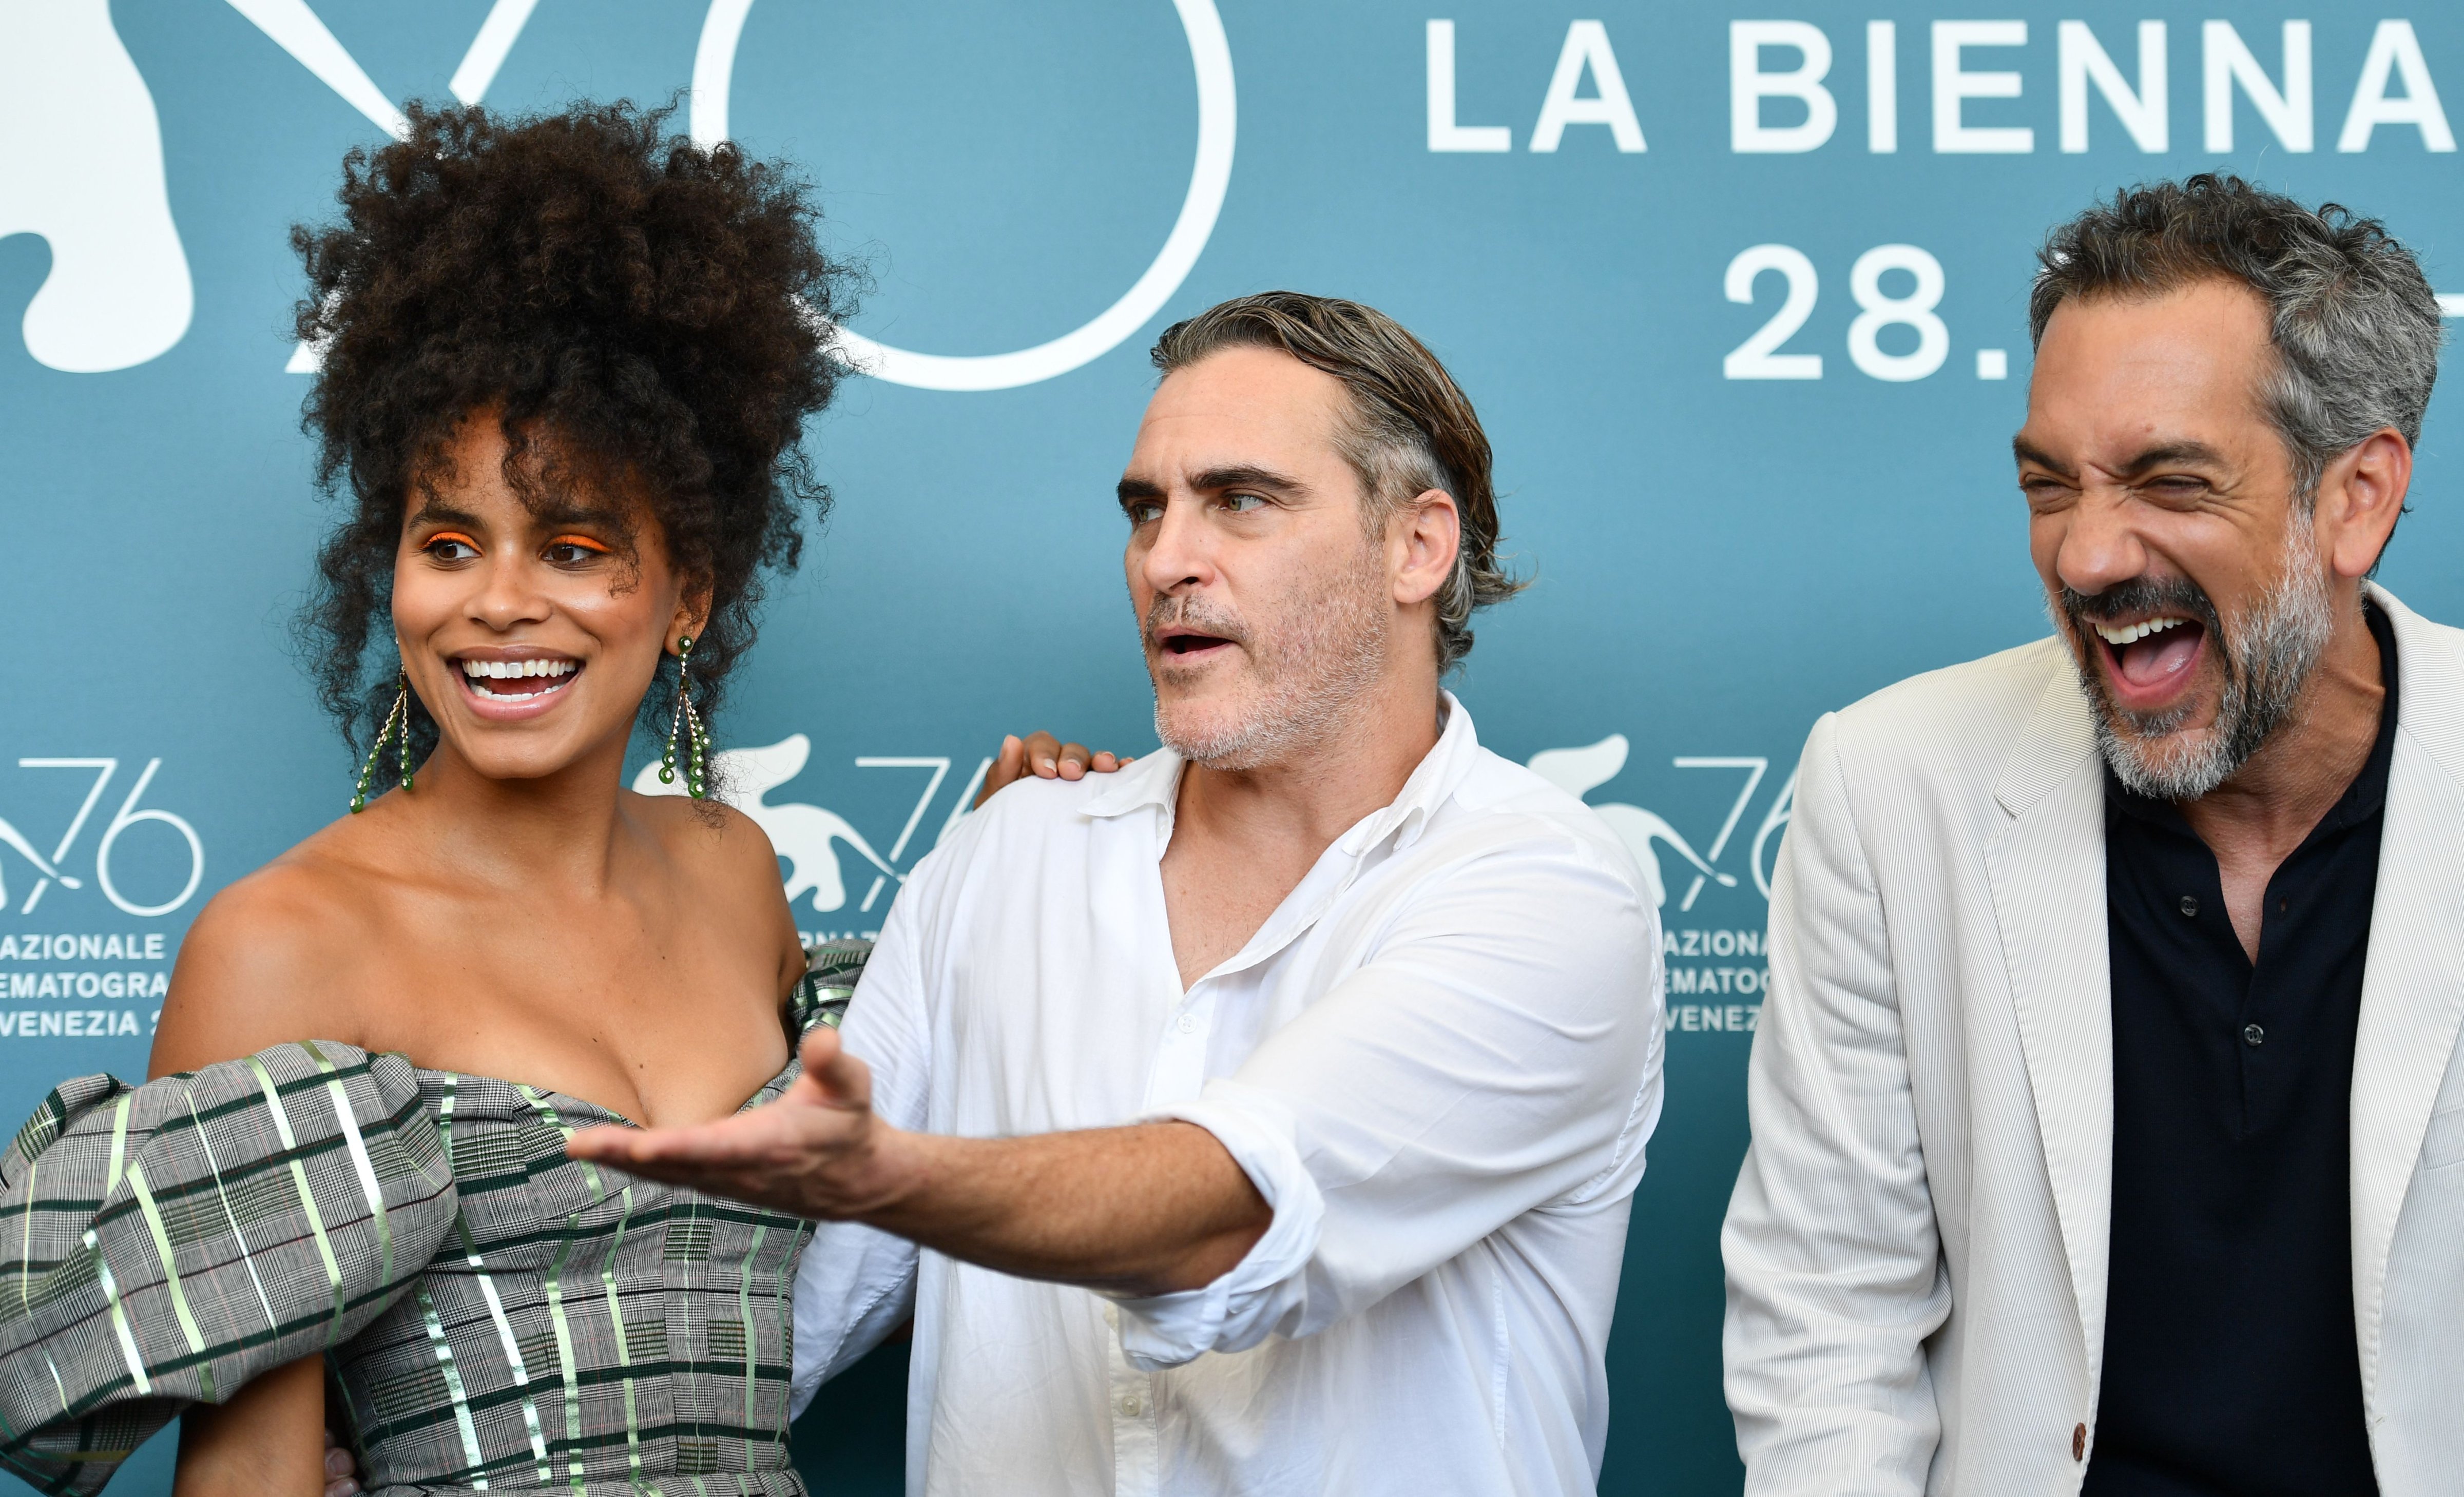 Zazie Beetz, Joaquin Phoenix and director Todd Phillips attend a photocall for the film 